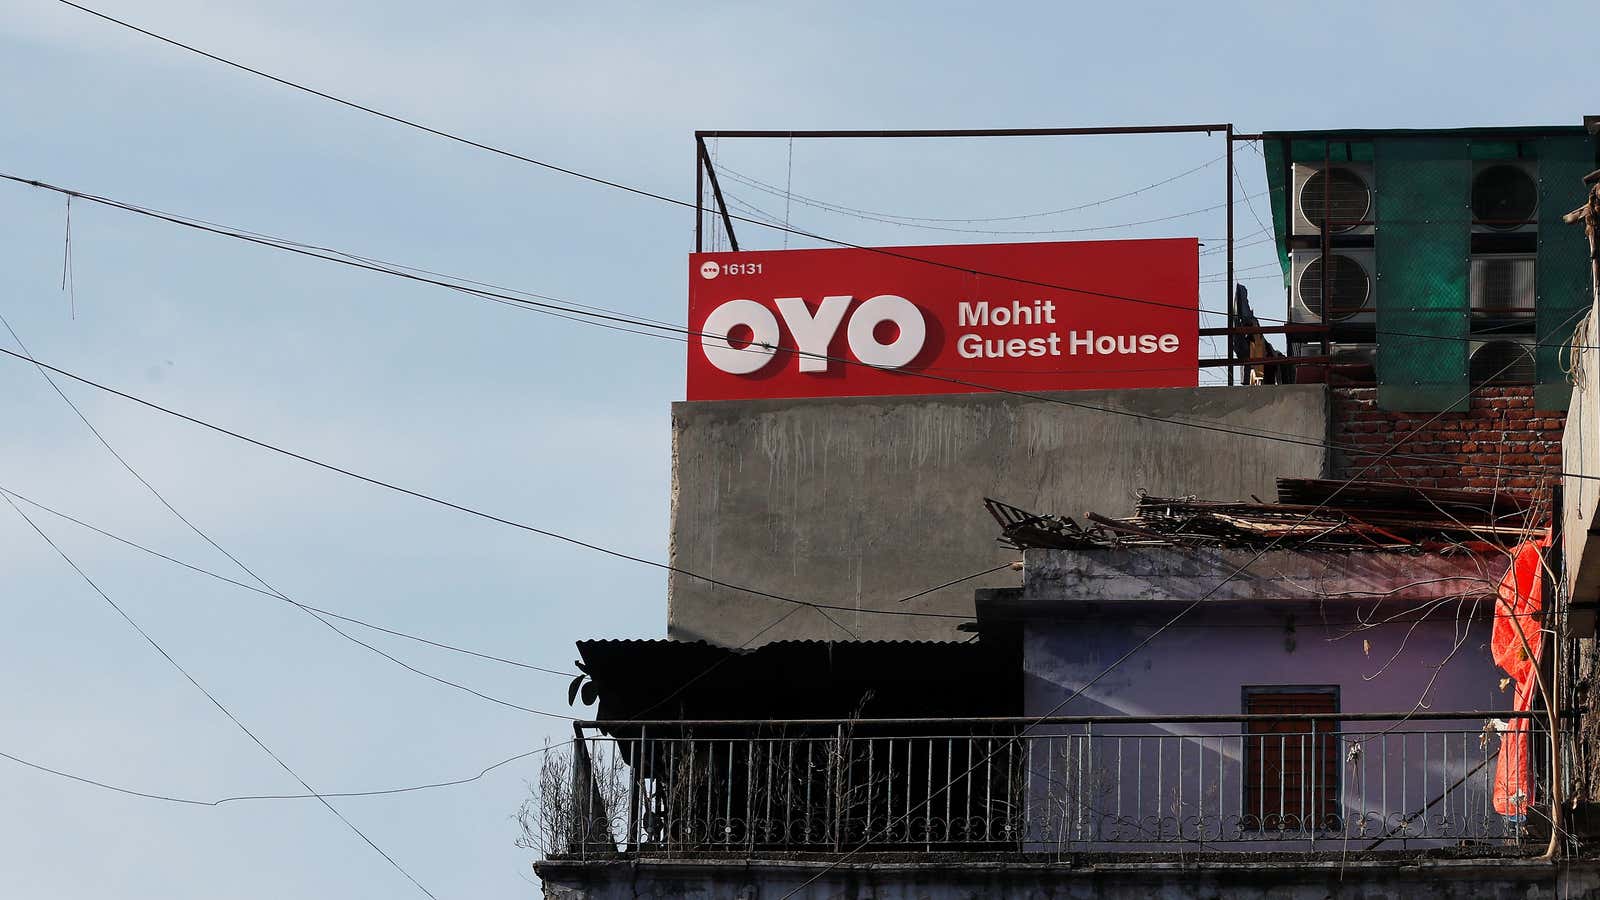 Oyo Hotels is the new crown jewel in SoftBank’s Vision Fund.